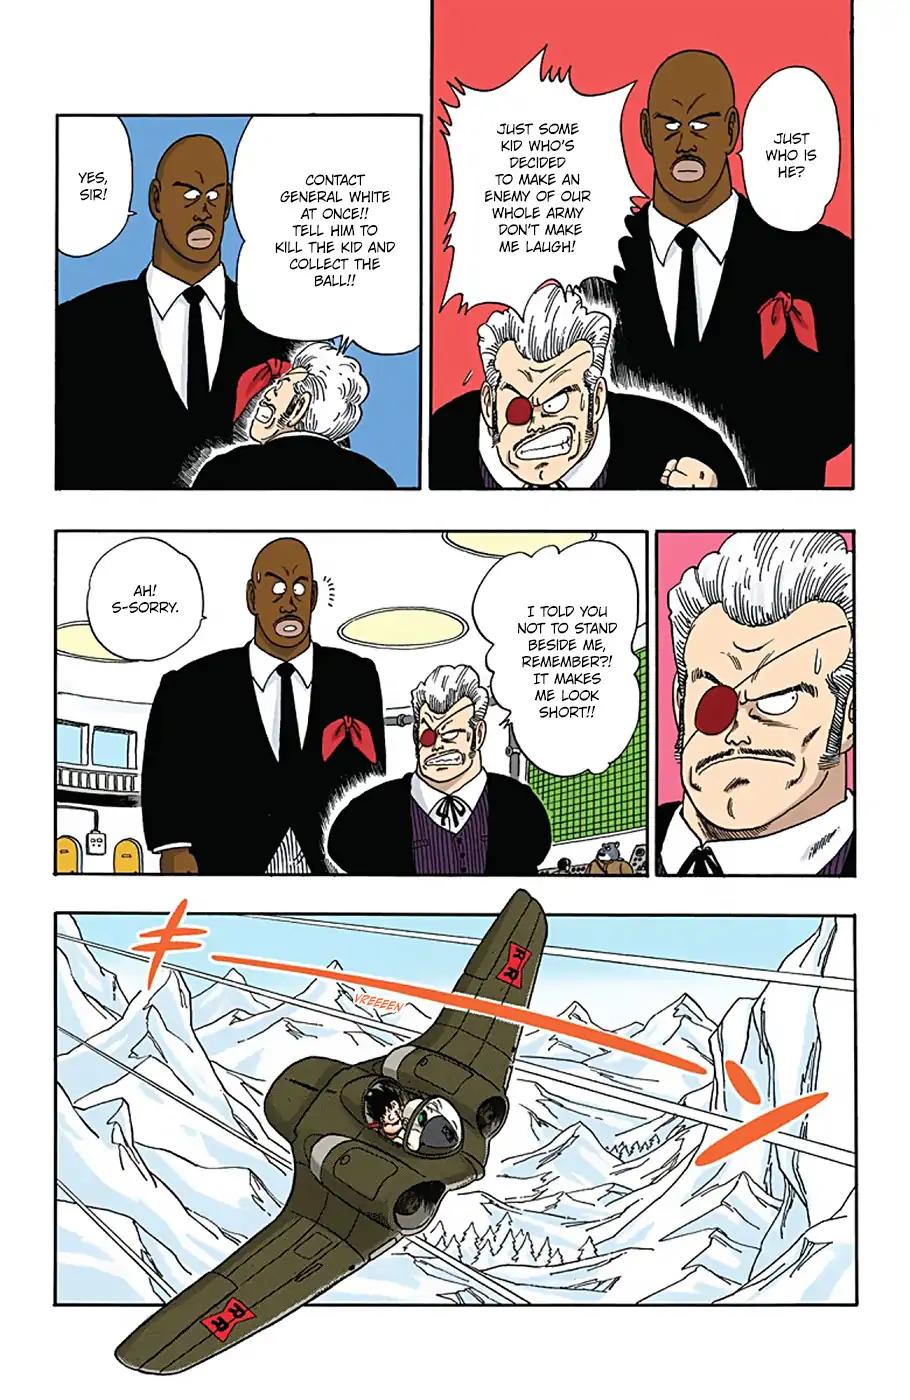 Dragon Ball - Full Color Vol.5 Chapter 56: